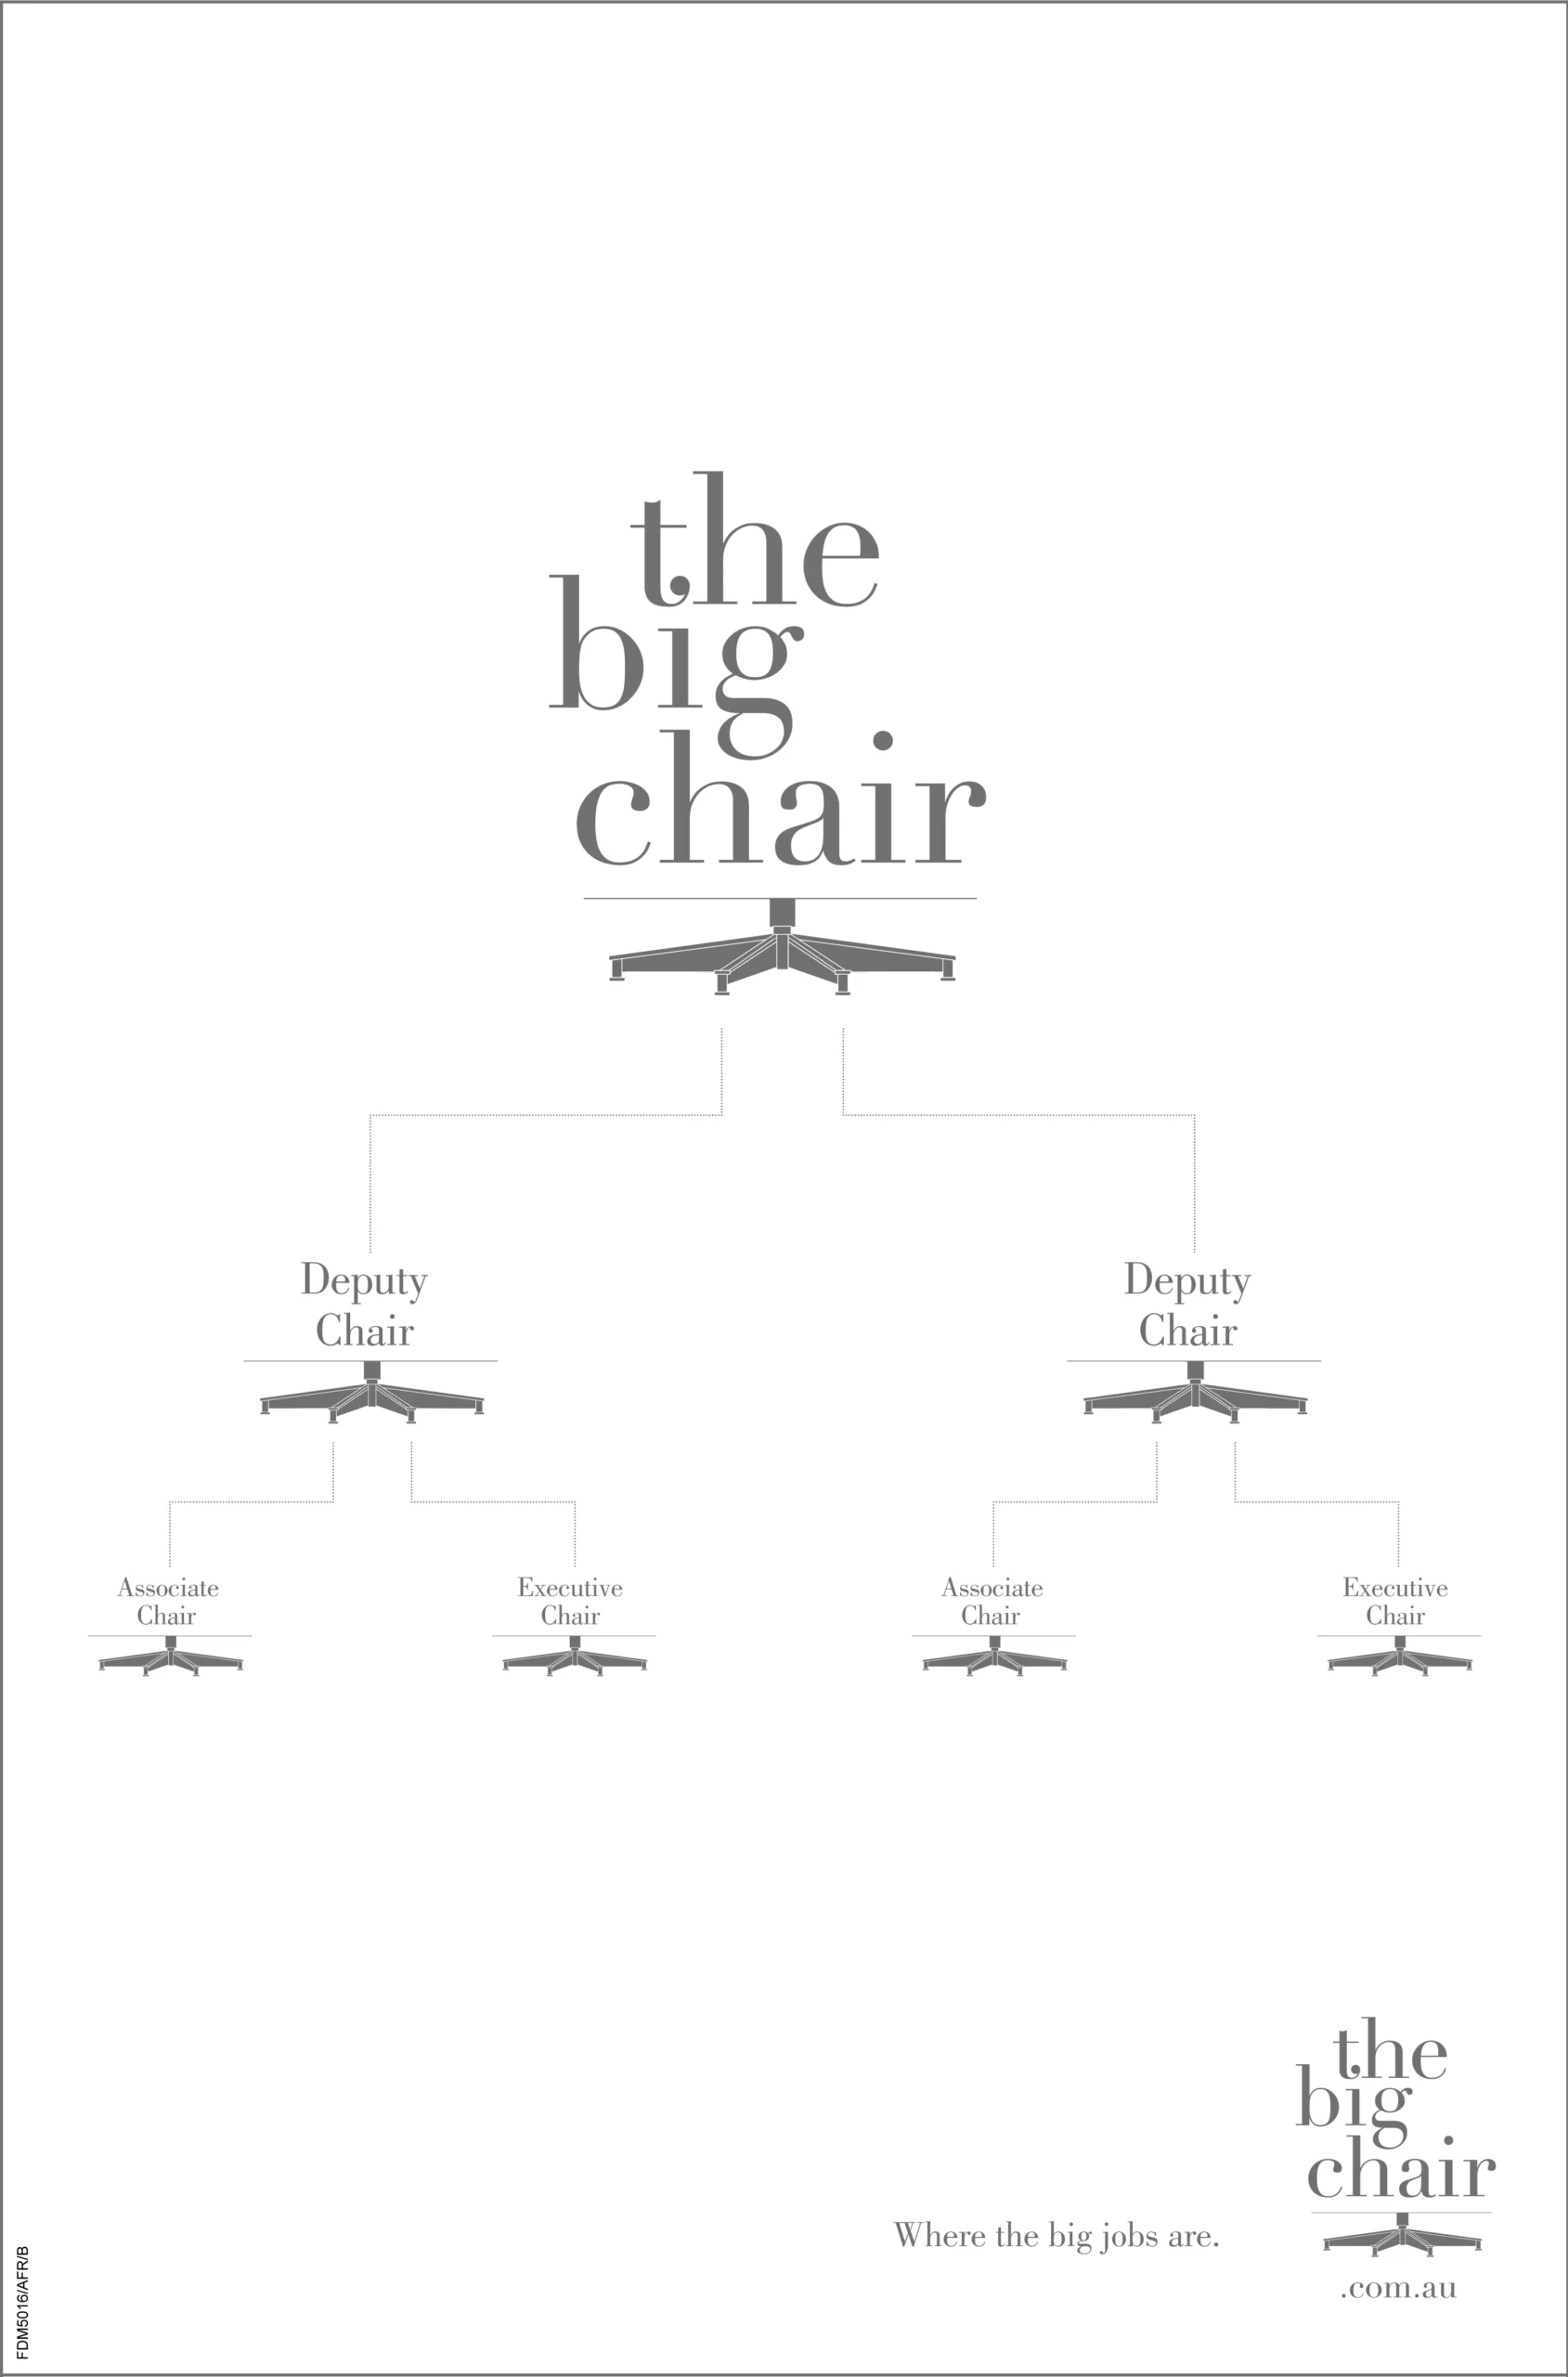 A newspaper advert for The Big Chair that shows a corporate organisation chart in a funny way